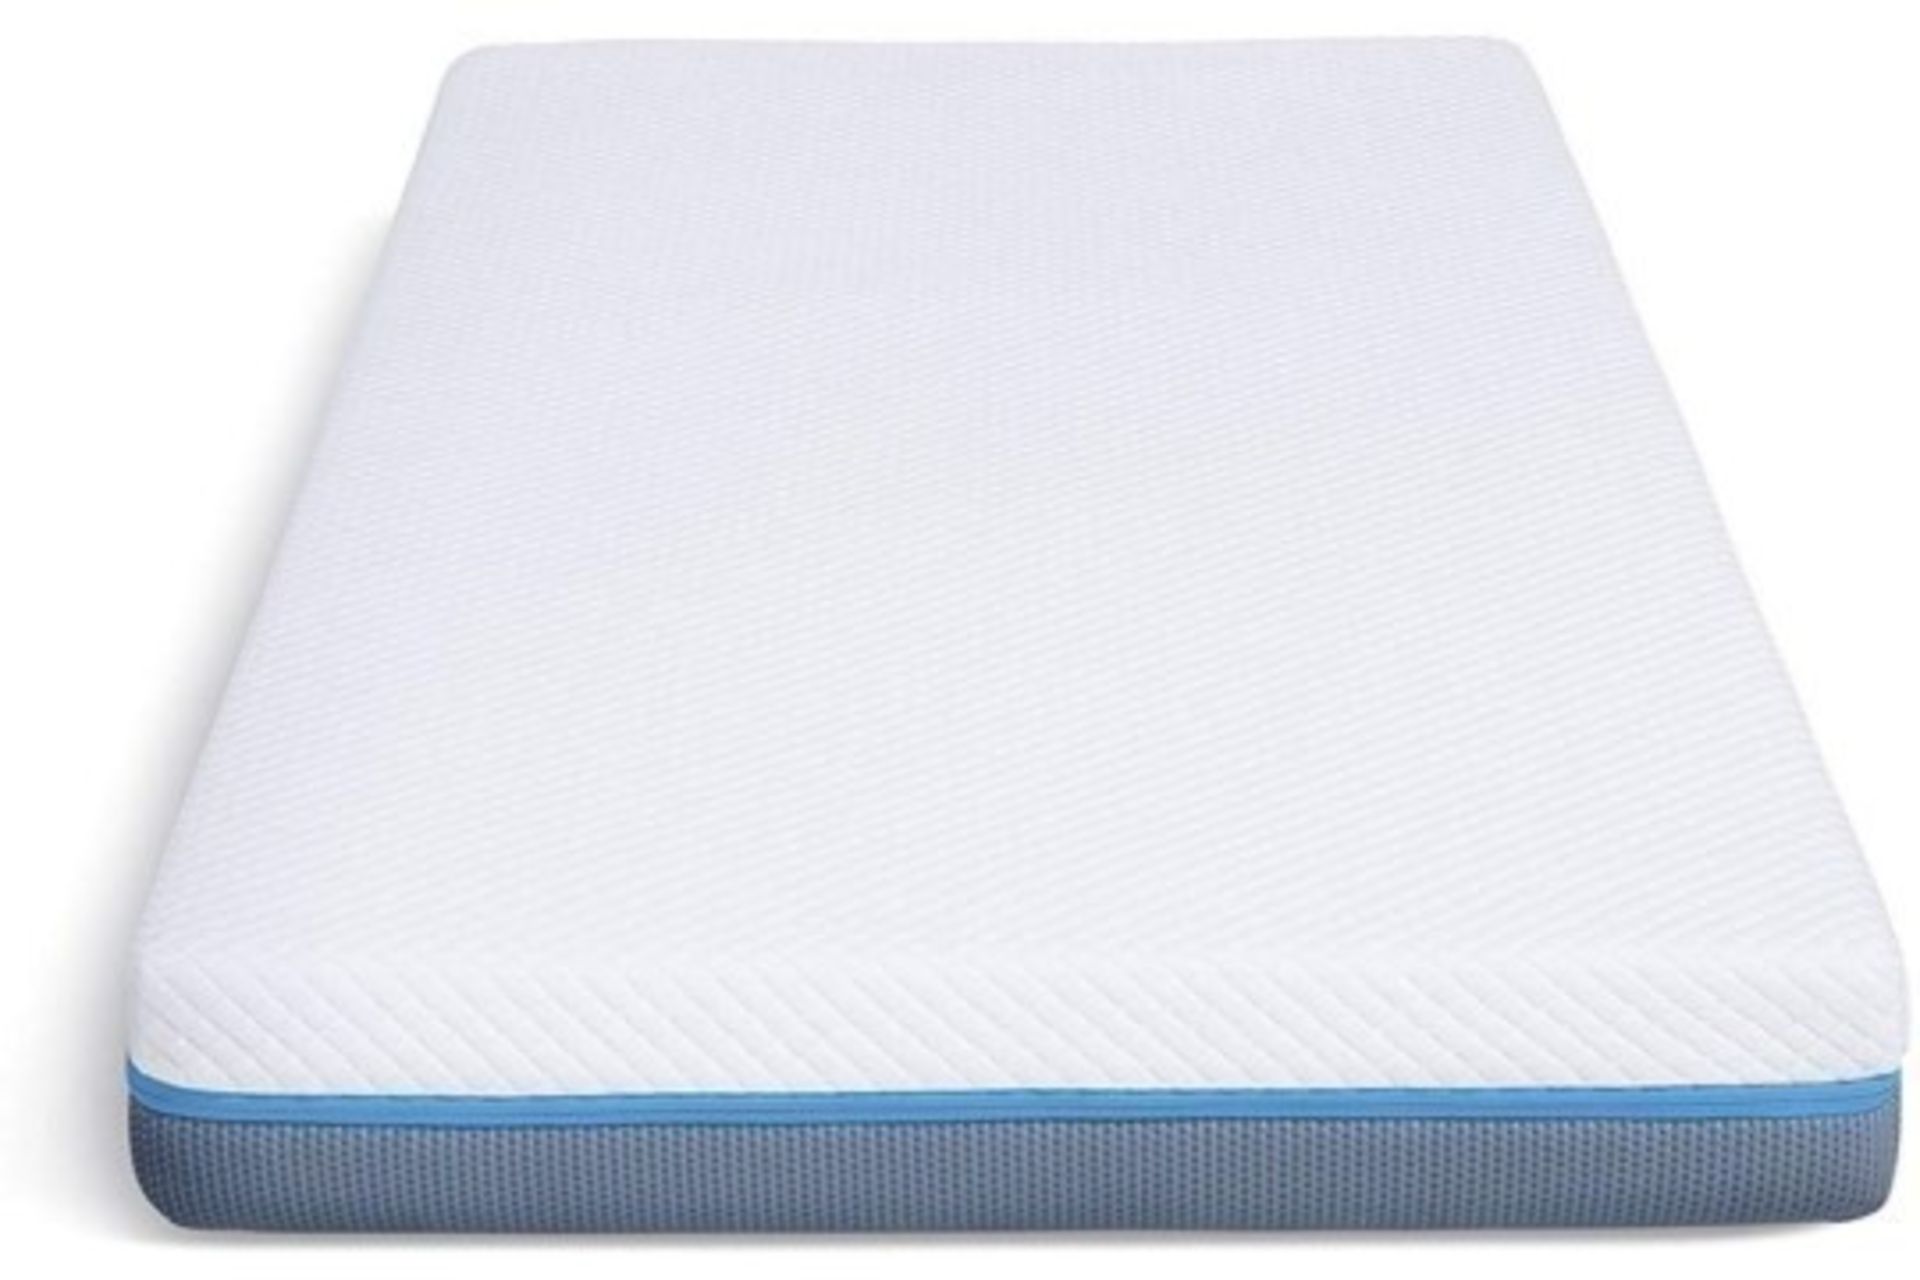 Boxed Brand New King 5ft Simba Style Memory Foam Mattress With a Knitted Fabric Zipon Cover in Molly